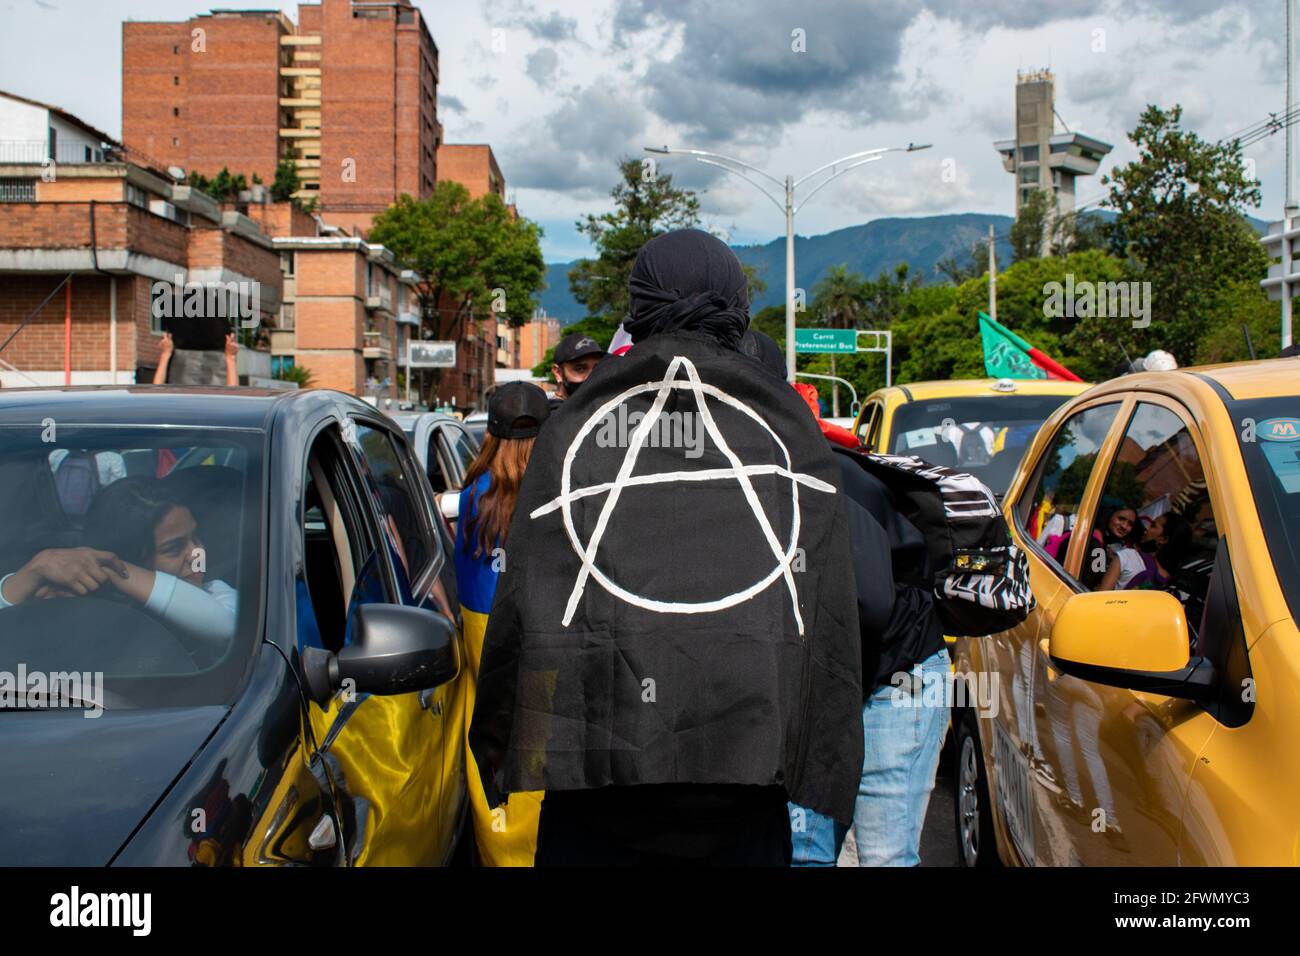 Medellin, Antioquia, Colombia. 22nd May, 2021. A demonstrator with an Anarchy logo flag walks in between cars as clashes and riots evolve in Medellin, Colombia after demonstrators and riot police (ESMAD) during a demonstration that escalated to clashes after security cameras and commerce were affected by the protest. In Medellin, Antioquia, Colombia on 22, 2021. Credit: Miyer Juana/LongVisual/ZUMA Wire/Alamy Live News Stock Photo